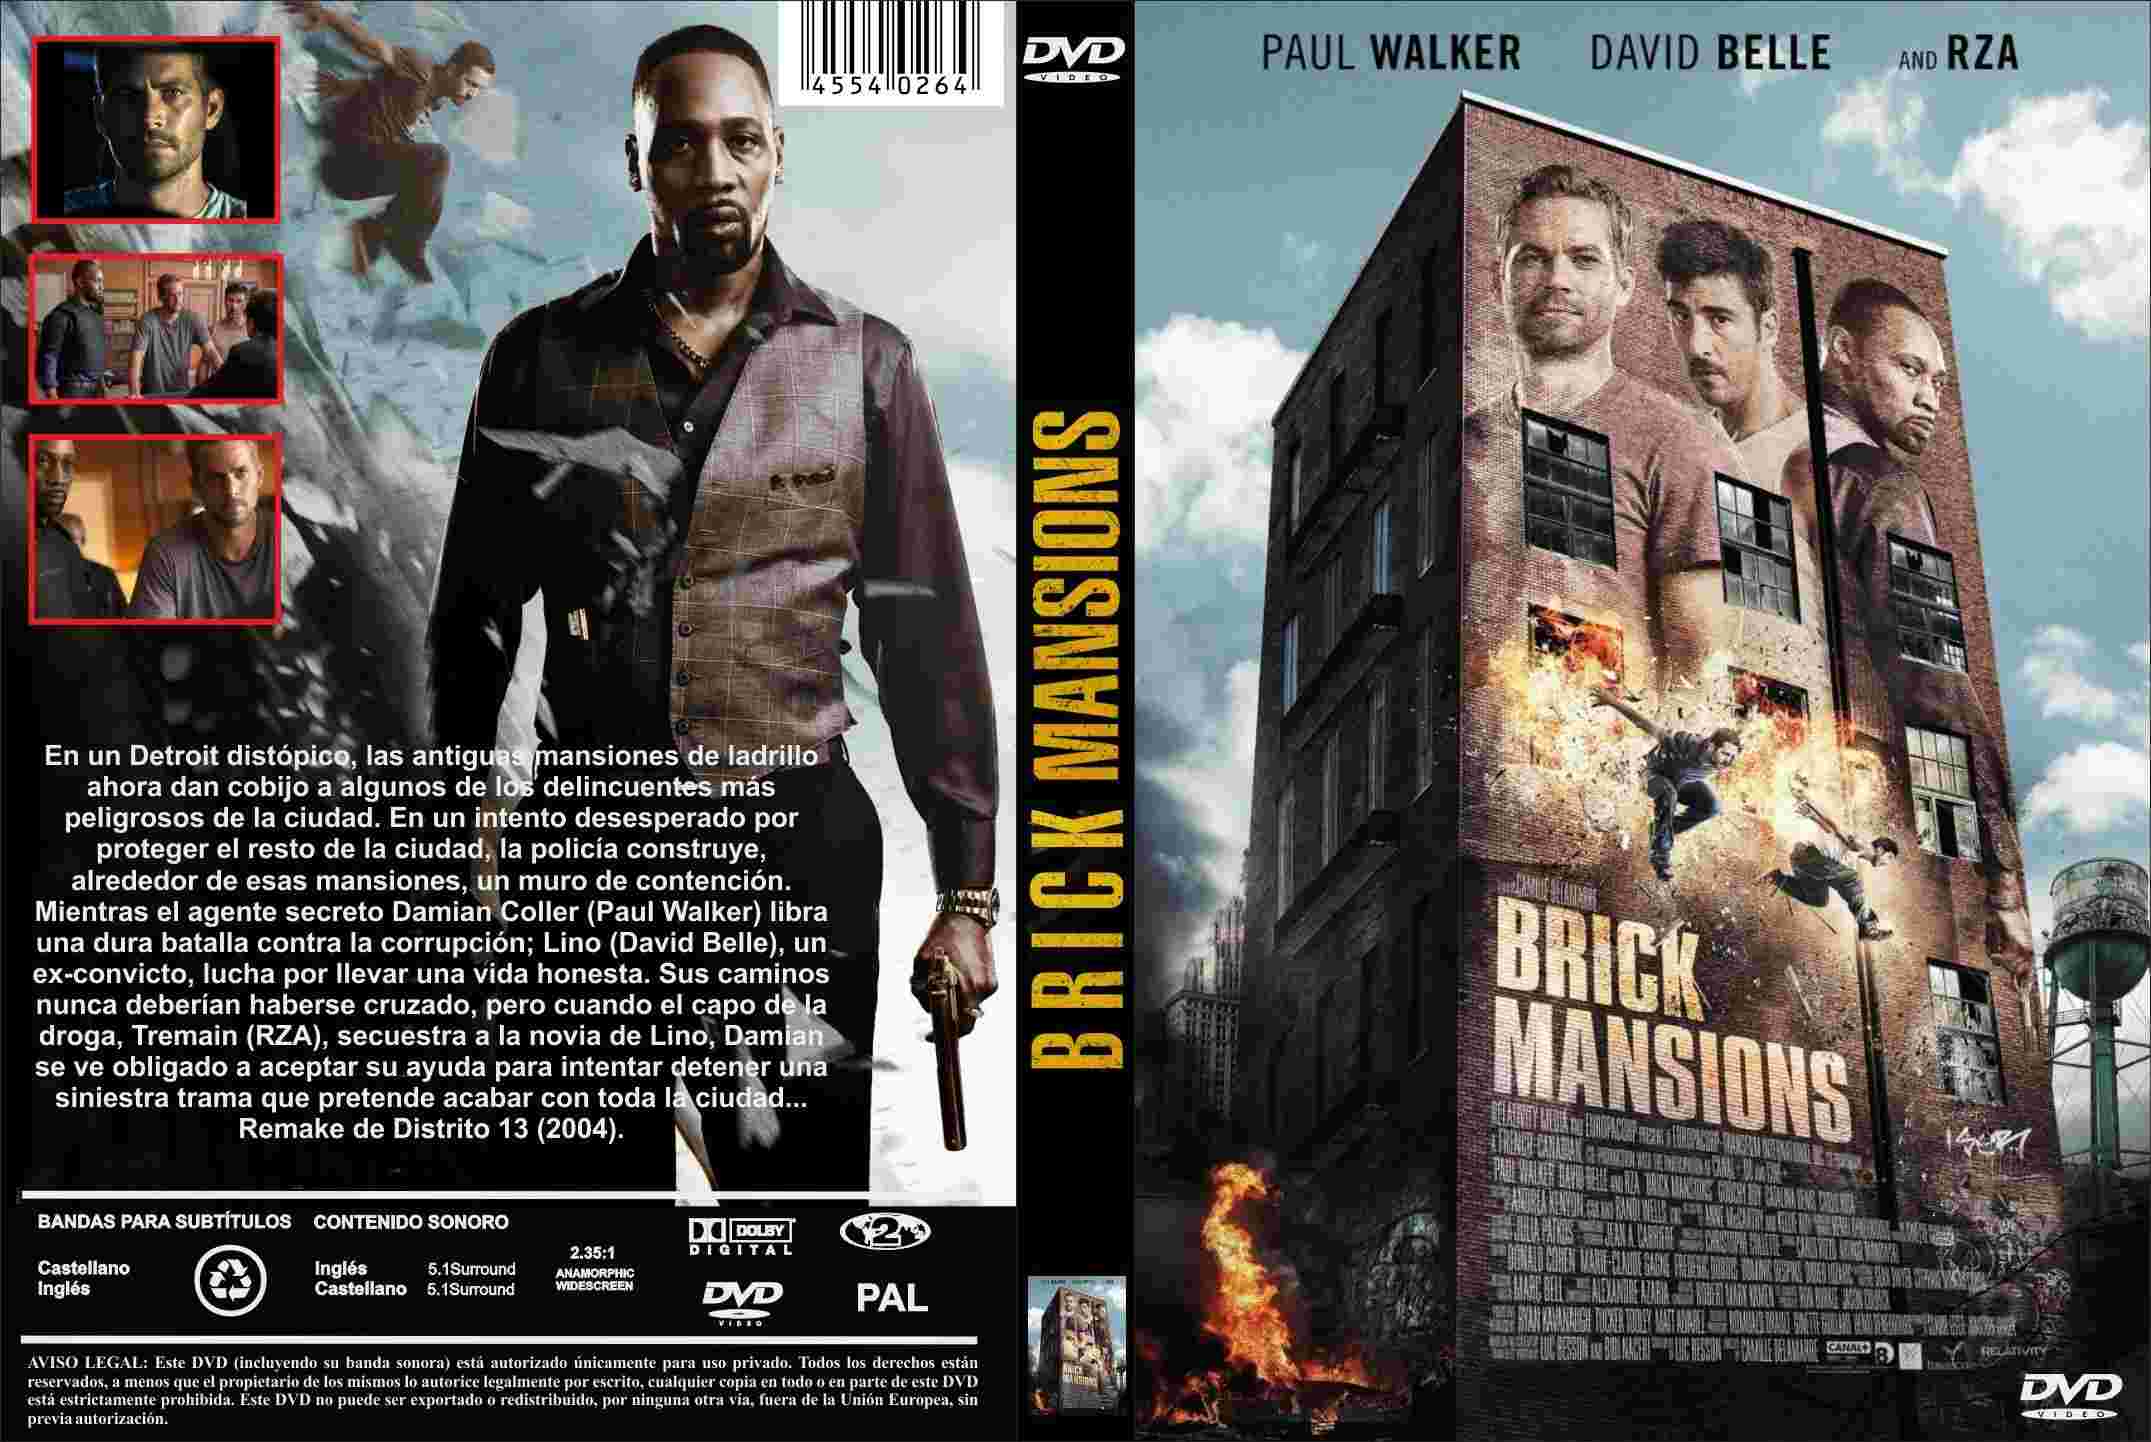 2014 Brick Mansions DVD-Cover